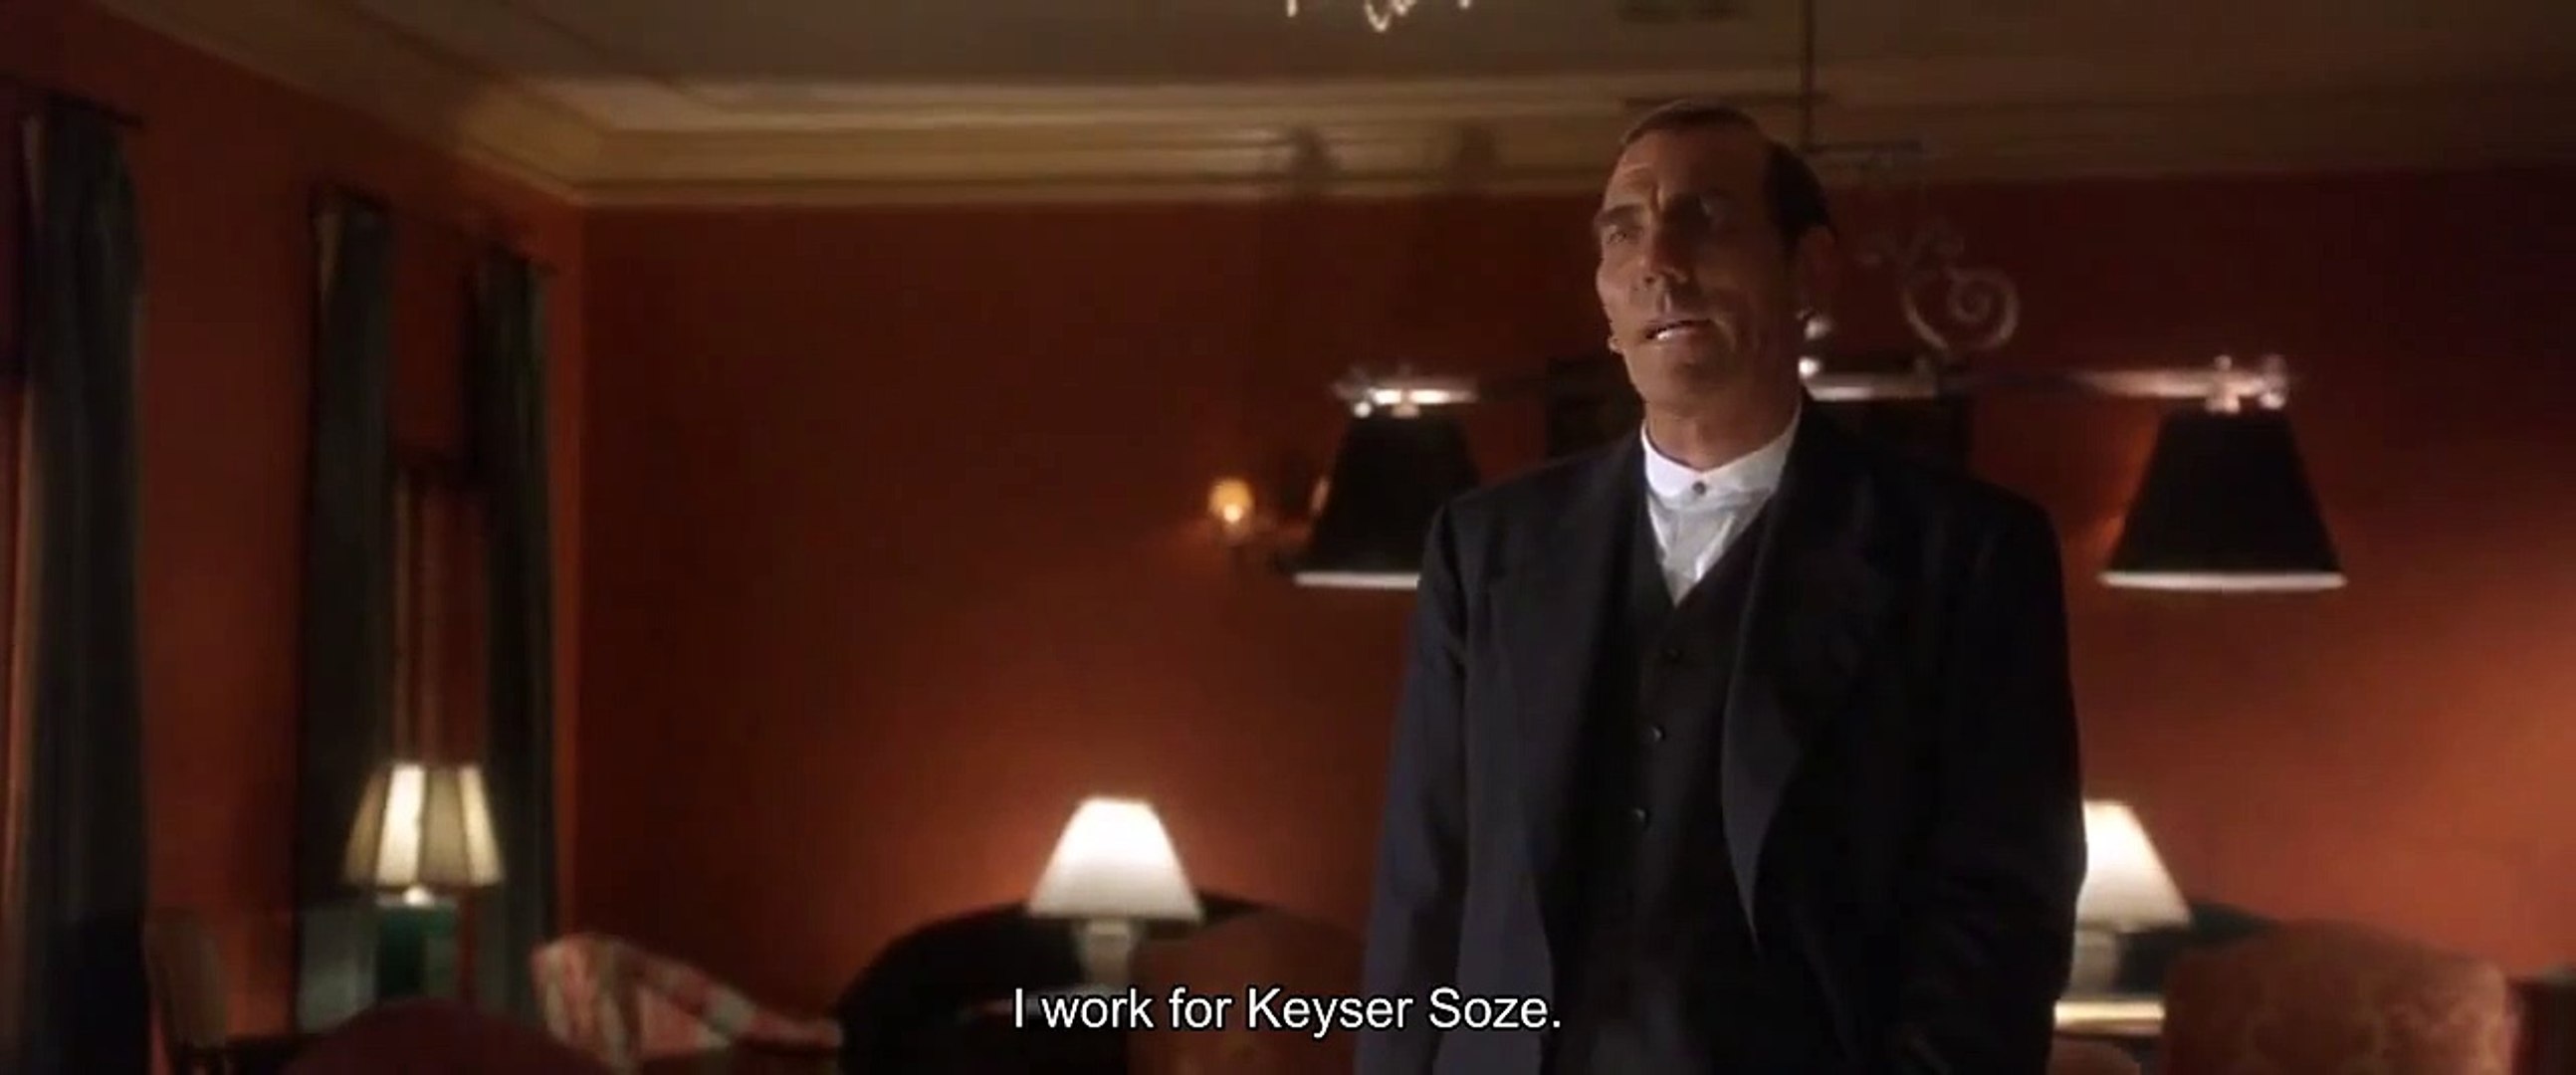 I work for Keyser Soze - The Usual Suspects - video Dailymotion